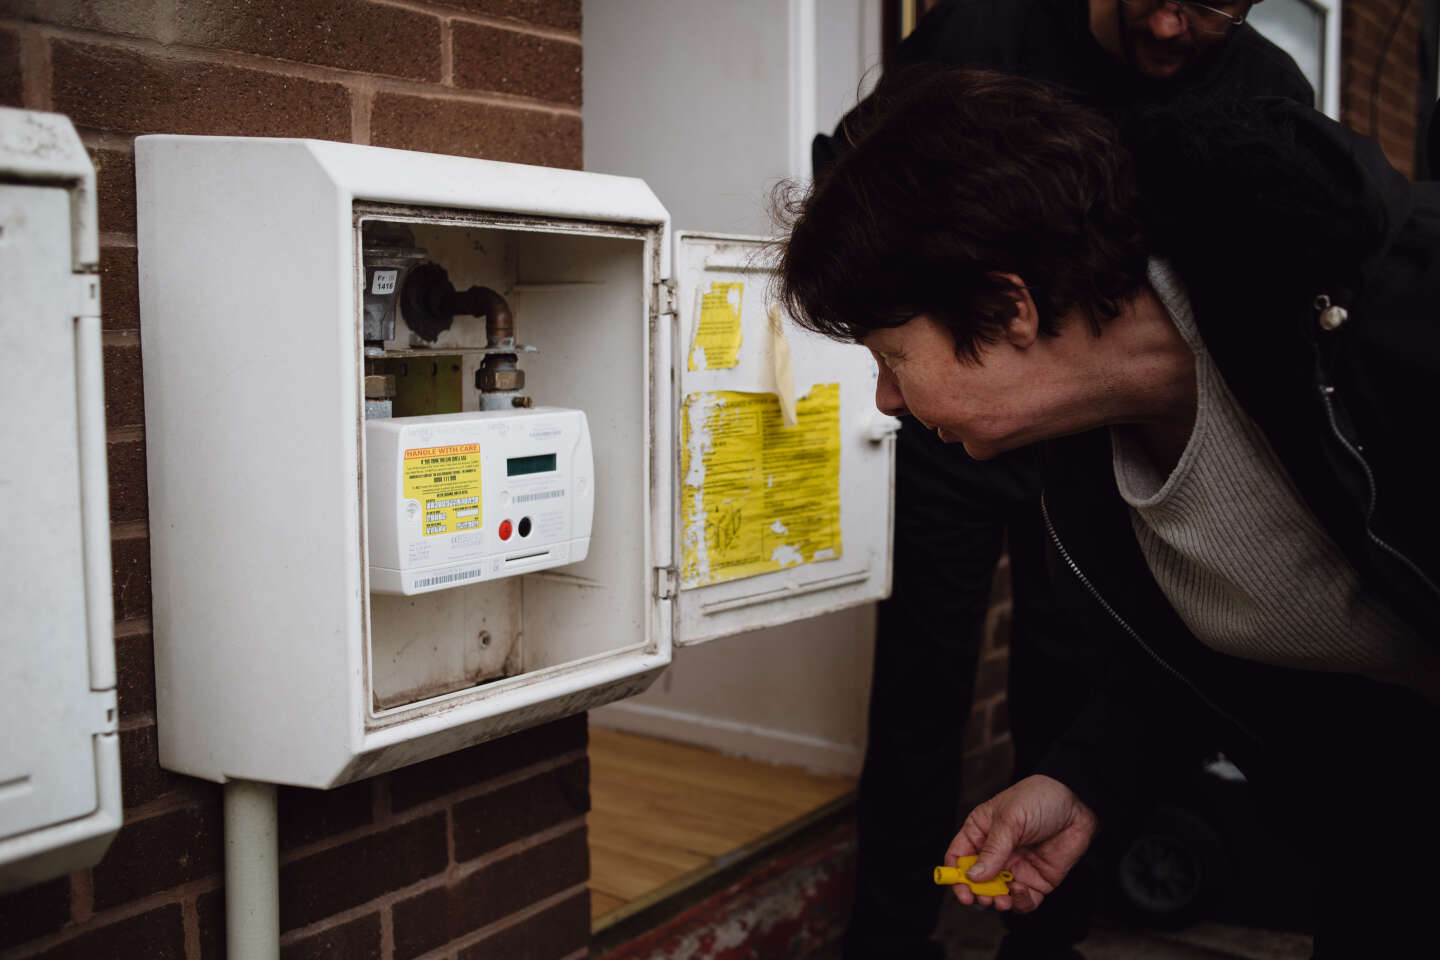 In the UK, the prepaid gas and electricity meter scam